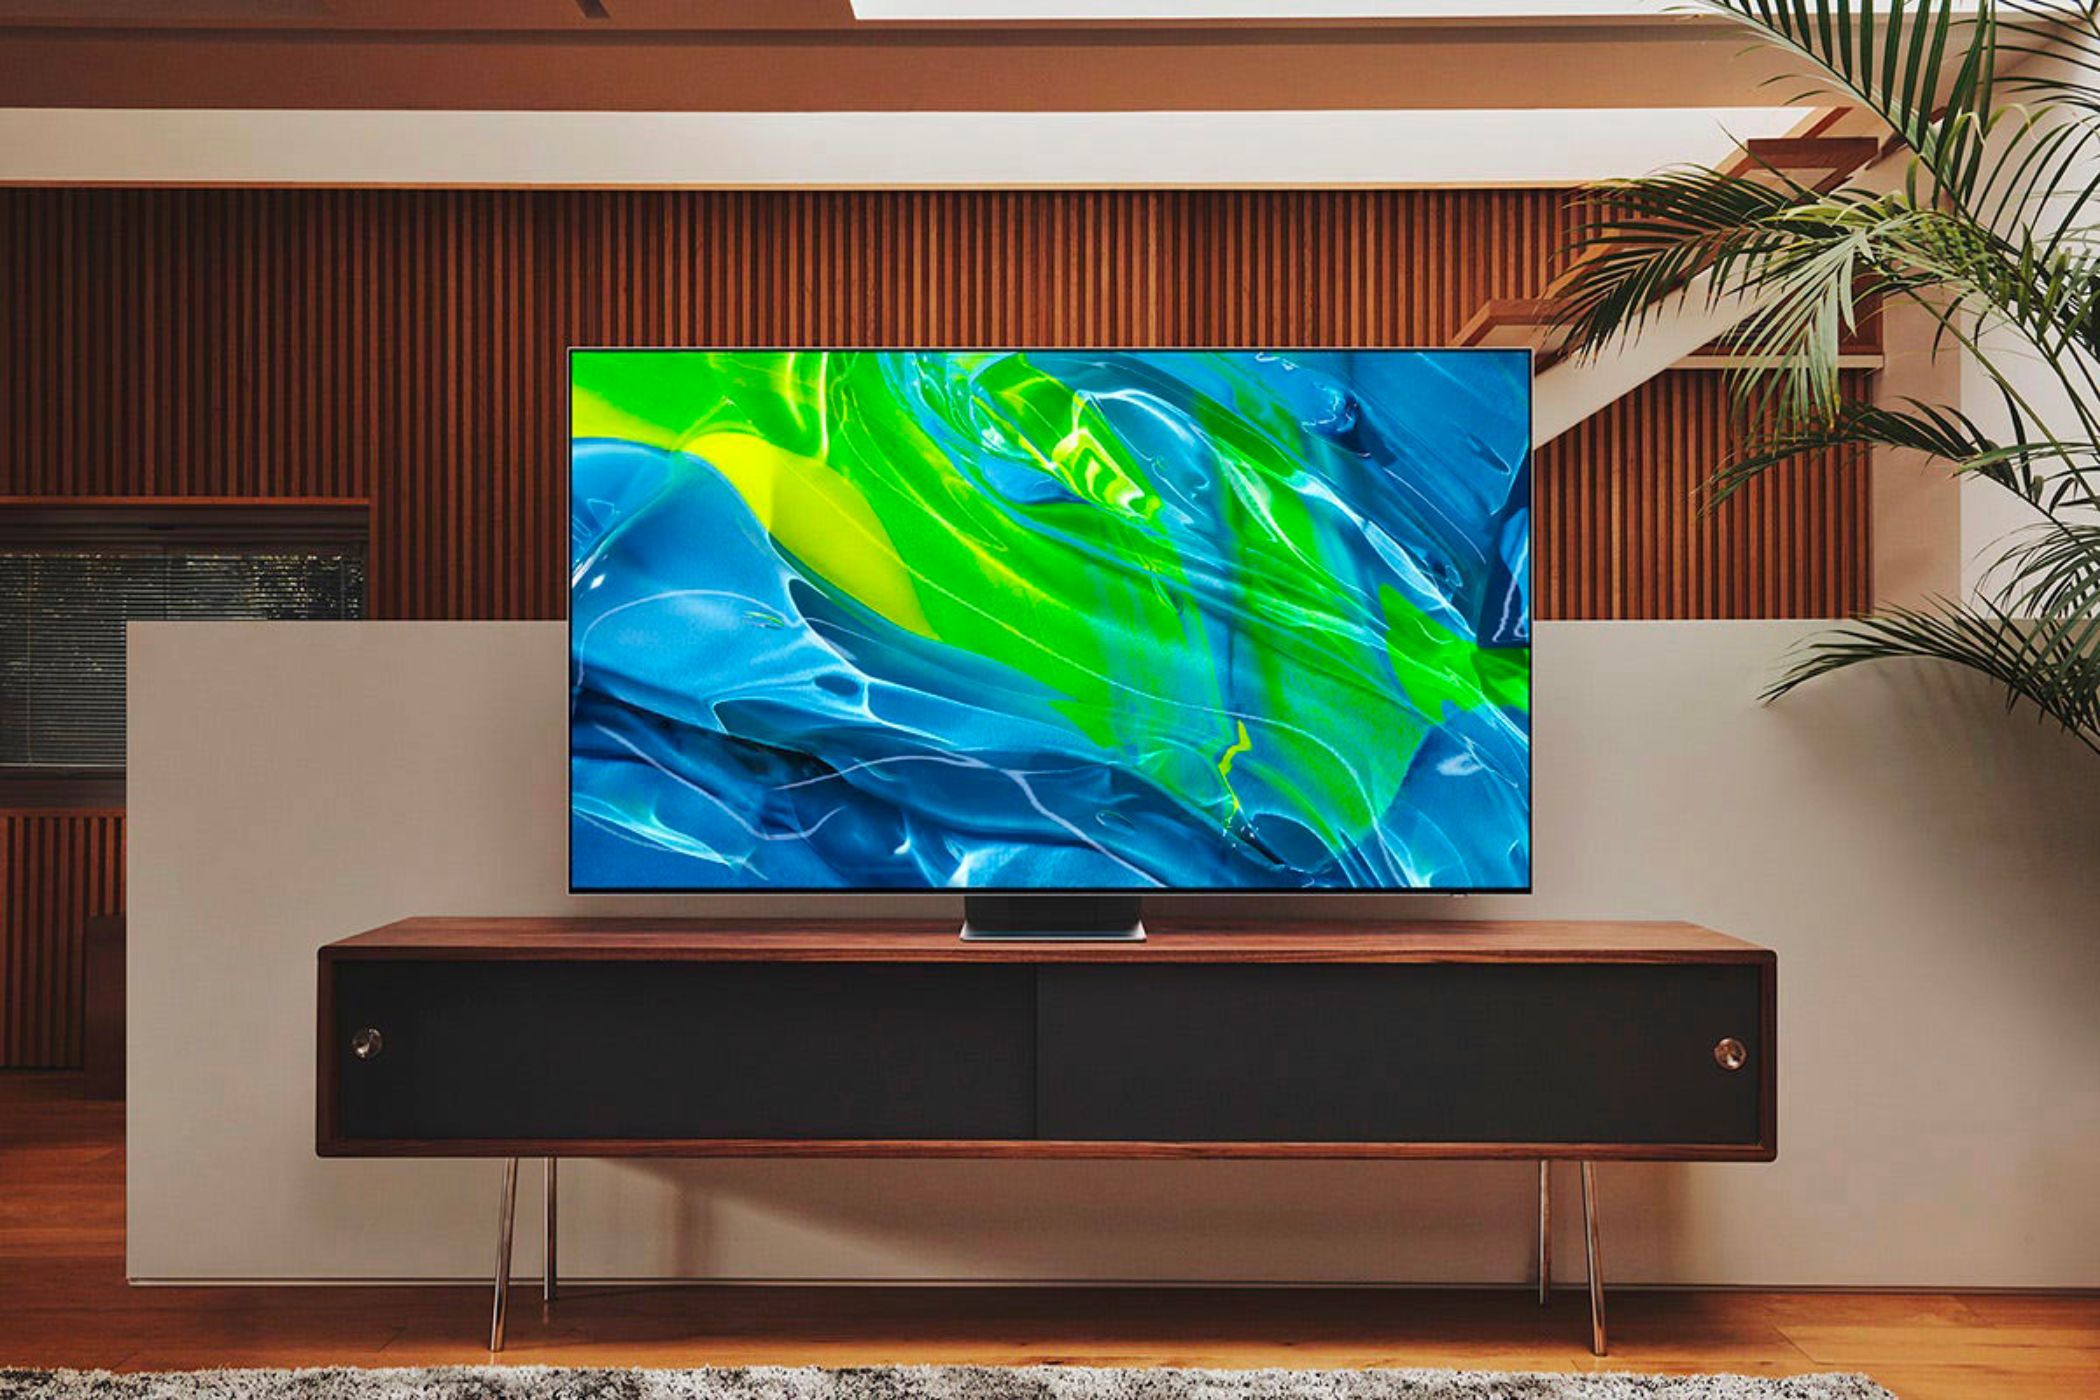 Photo of Samsung S95B OLED 4K TV on a wooden cabinet.